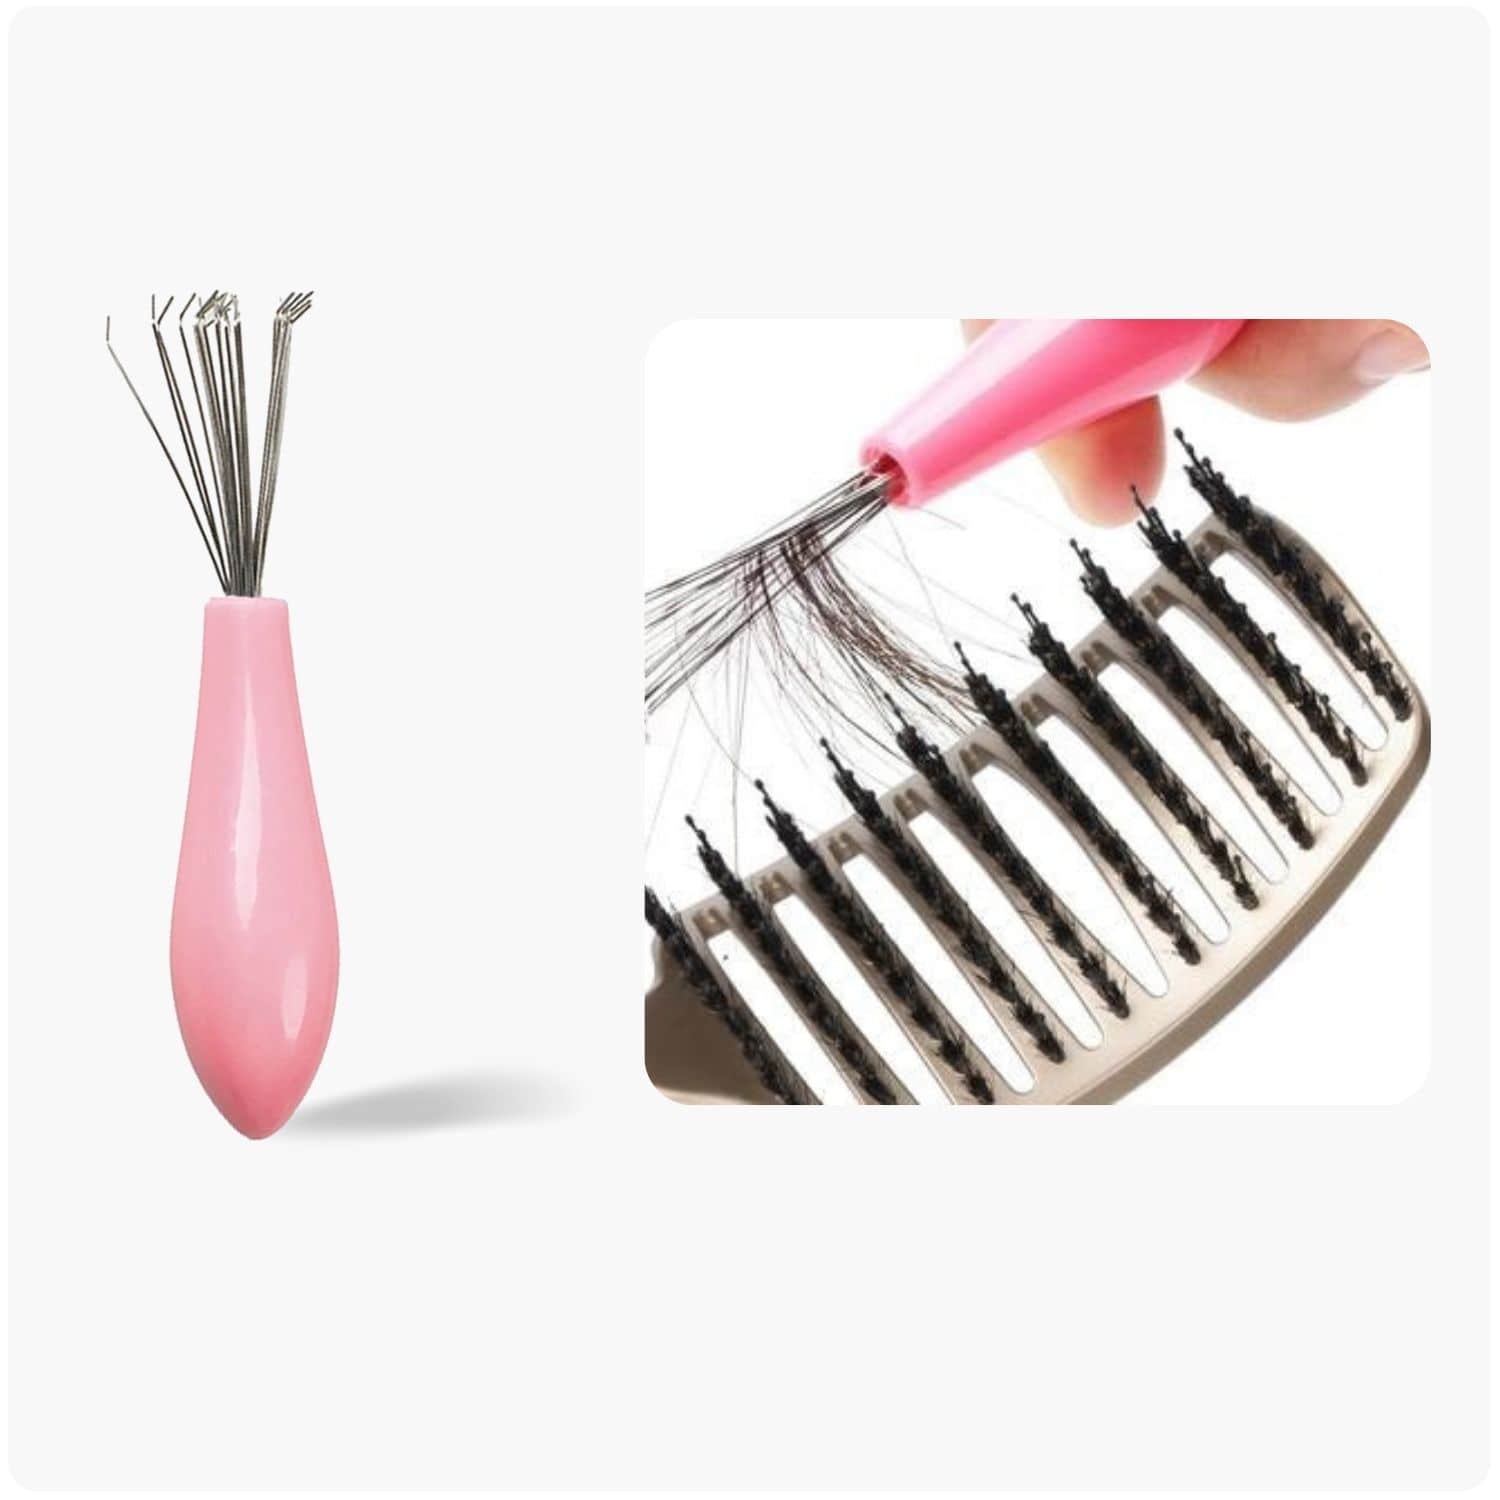 MyHairUp Cleaner Comb To Remove Hair From Brushes